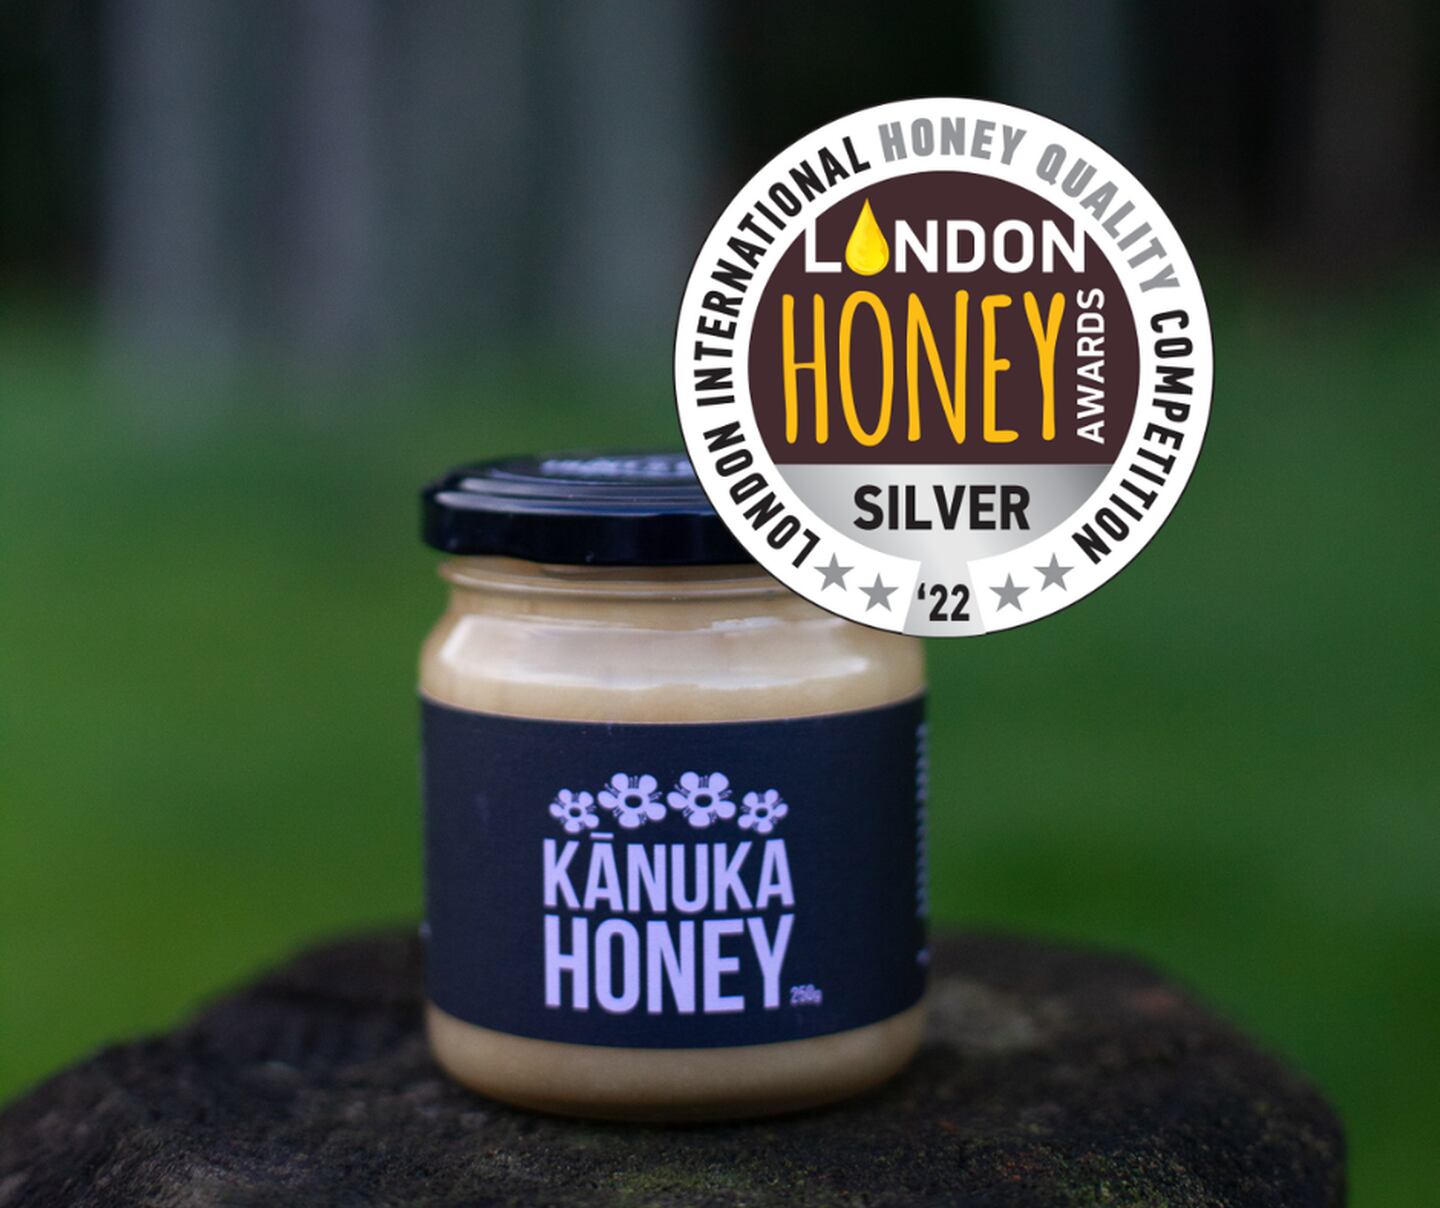 Hunt and Gather Bee Co's Kānuka honey won a silver medal at the London International Honey Awards. Photo / Supplied